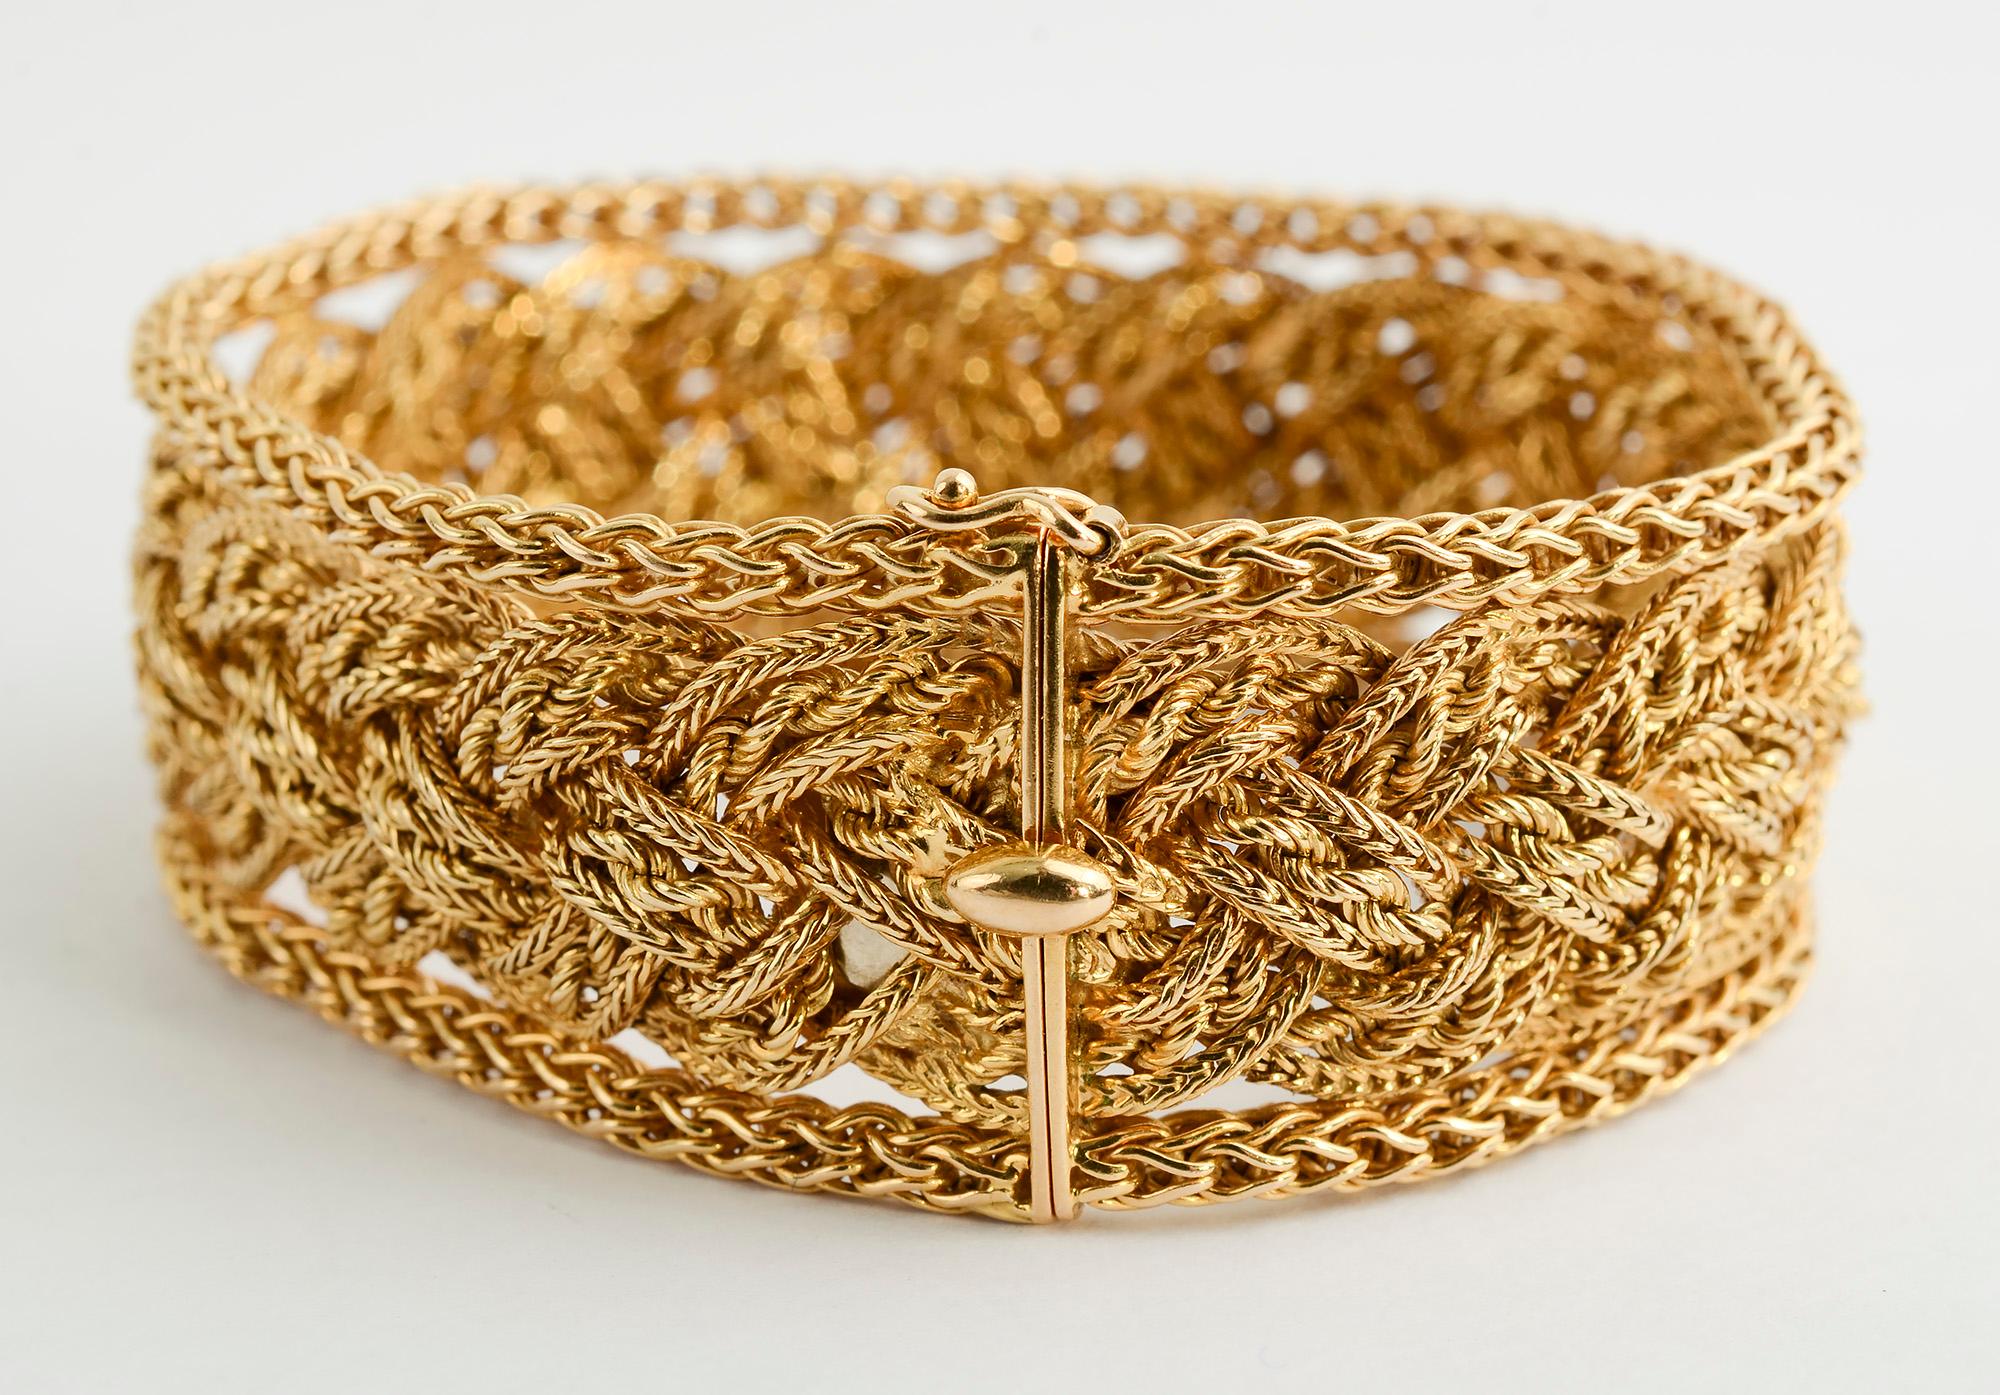 Elegant and finely detailed gold mesh bracelet by Bulgari. The interior is made of three strands of interwoven gold. The strands alternate between a herringbone pattern and a rope twist making for a very complex design. The bracelet is 7 1/8 inches